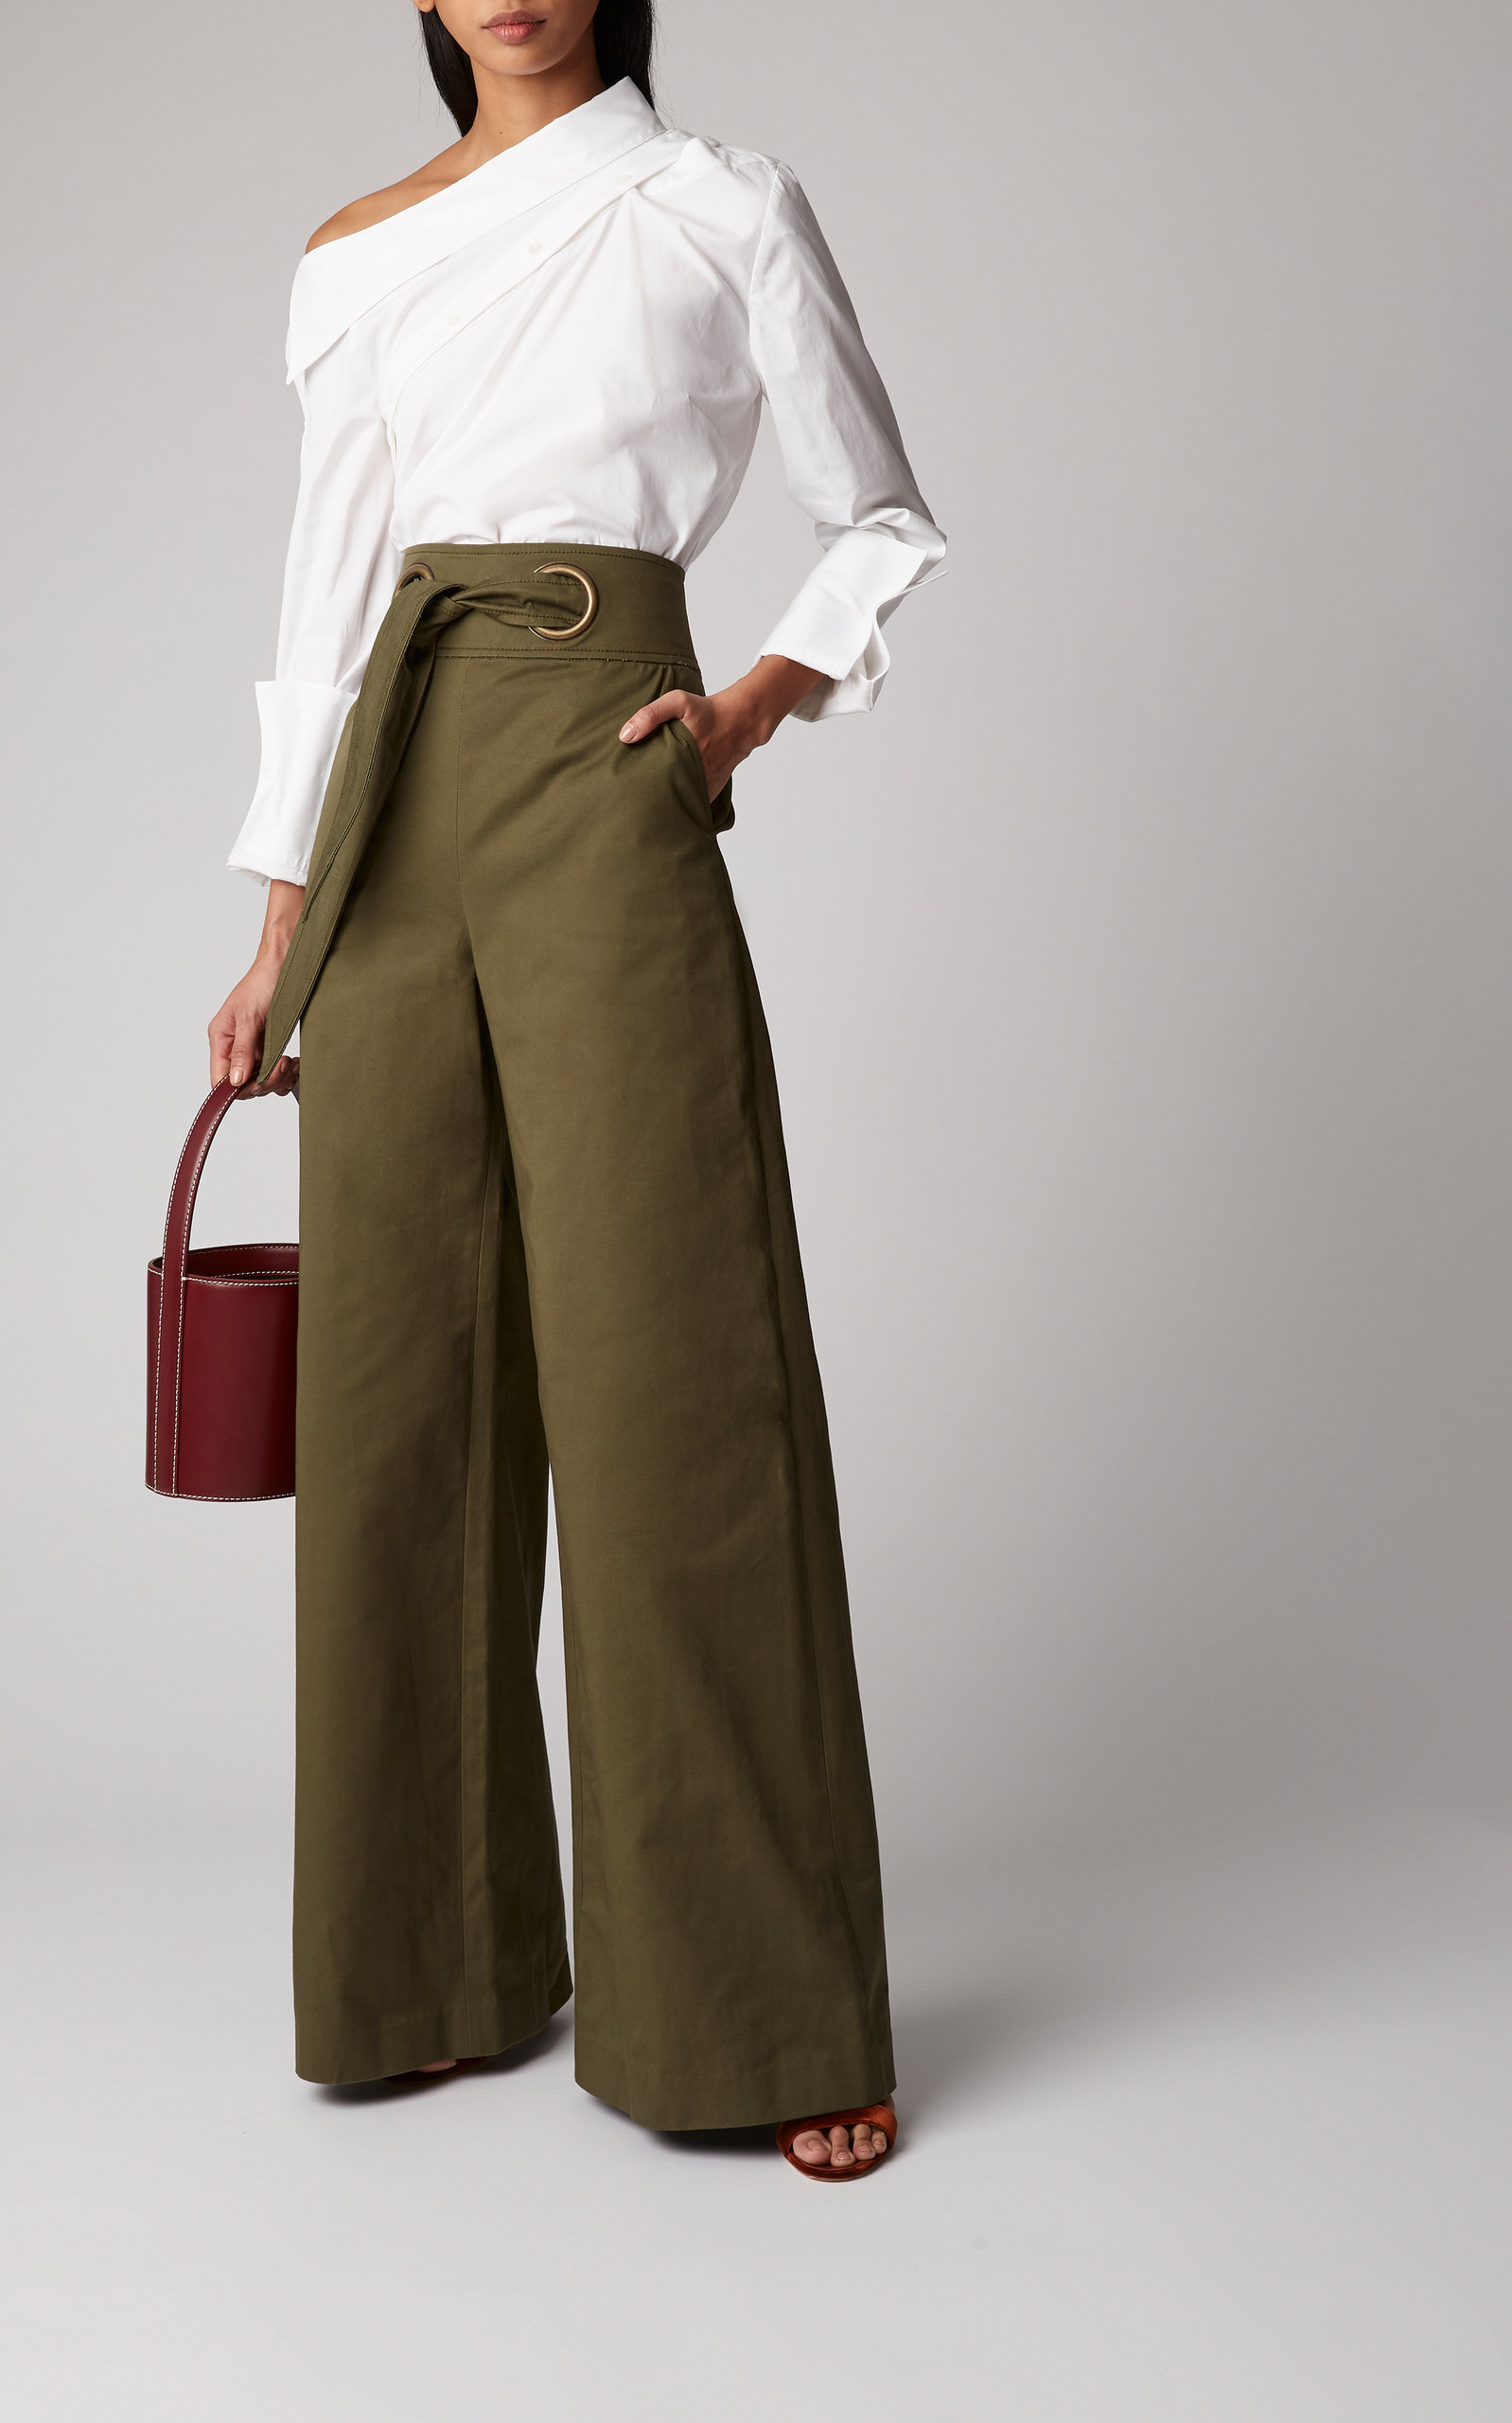 Cotton Trousers: Breathable and Stylish Staples for Every Wardrobe